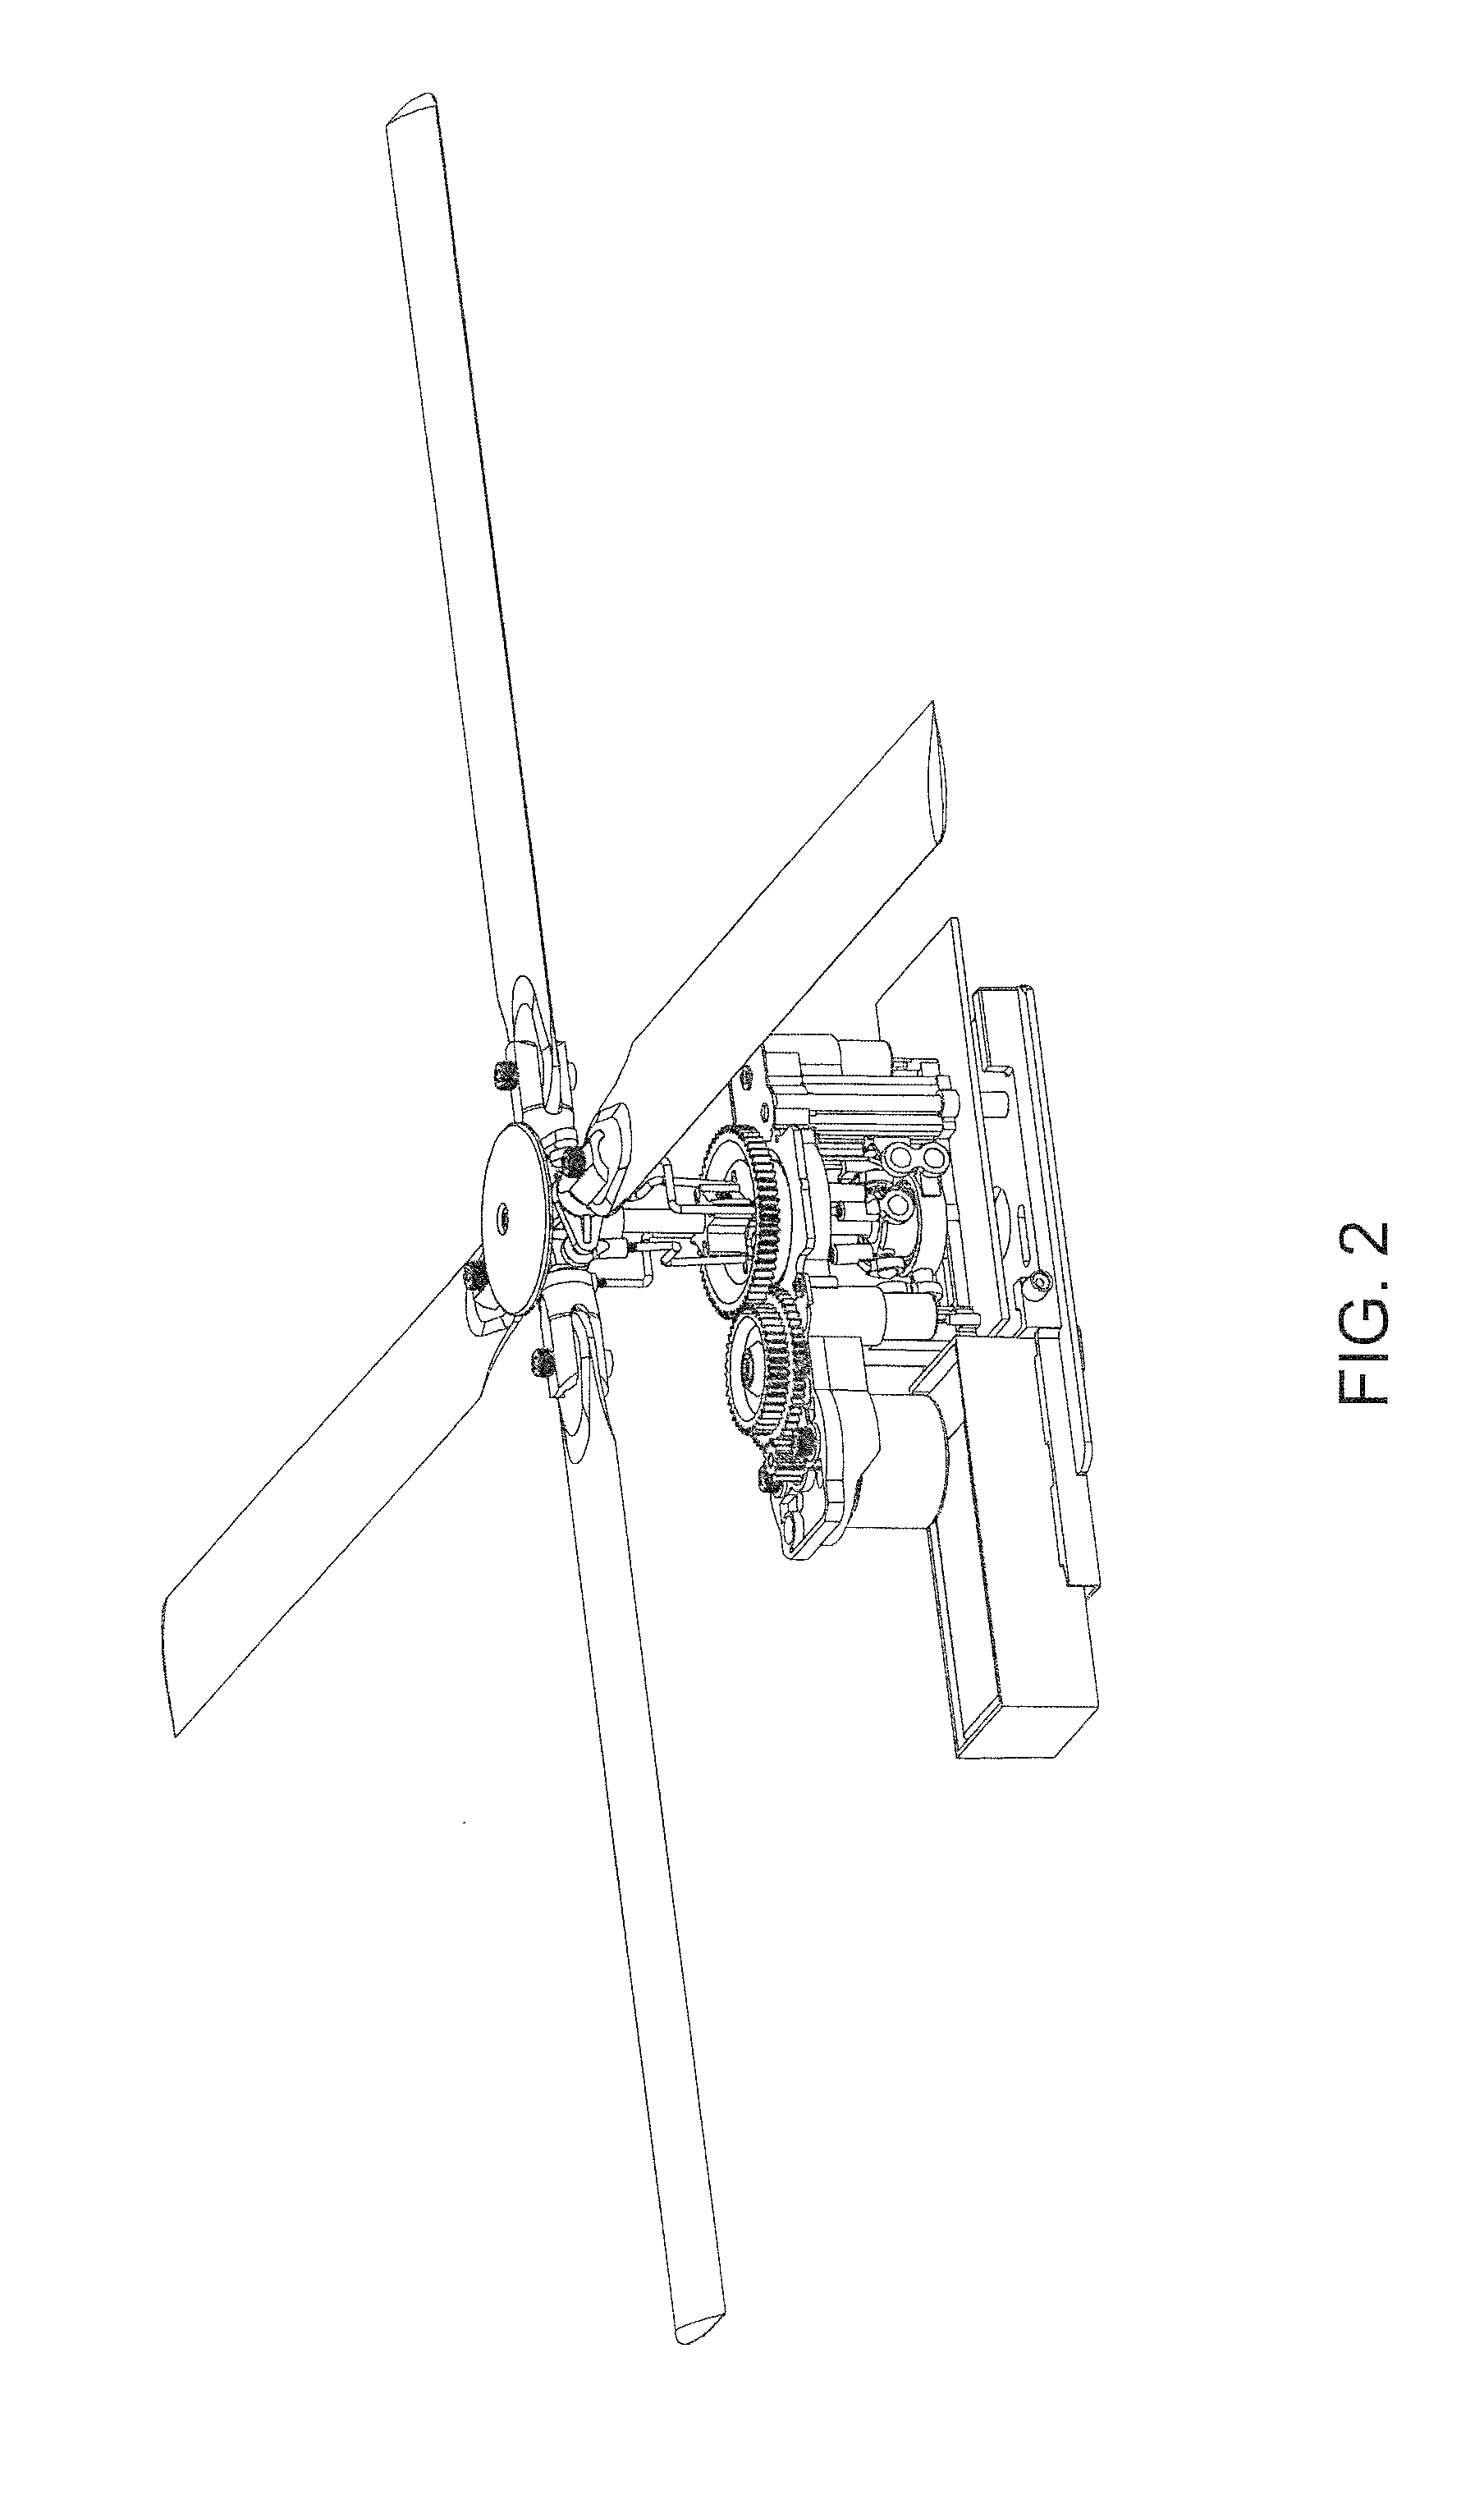 Transmission Mechanism for Remote-Controlled Model Stimulated Helicopter